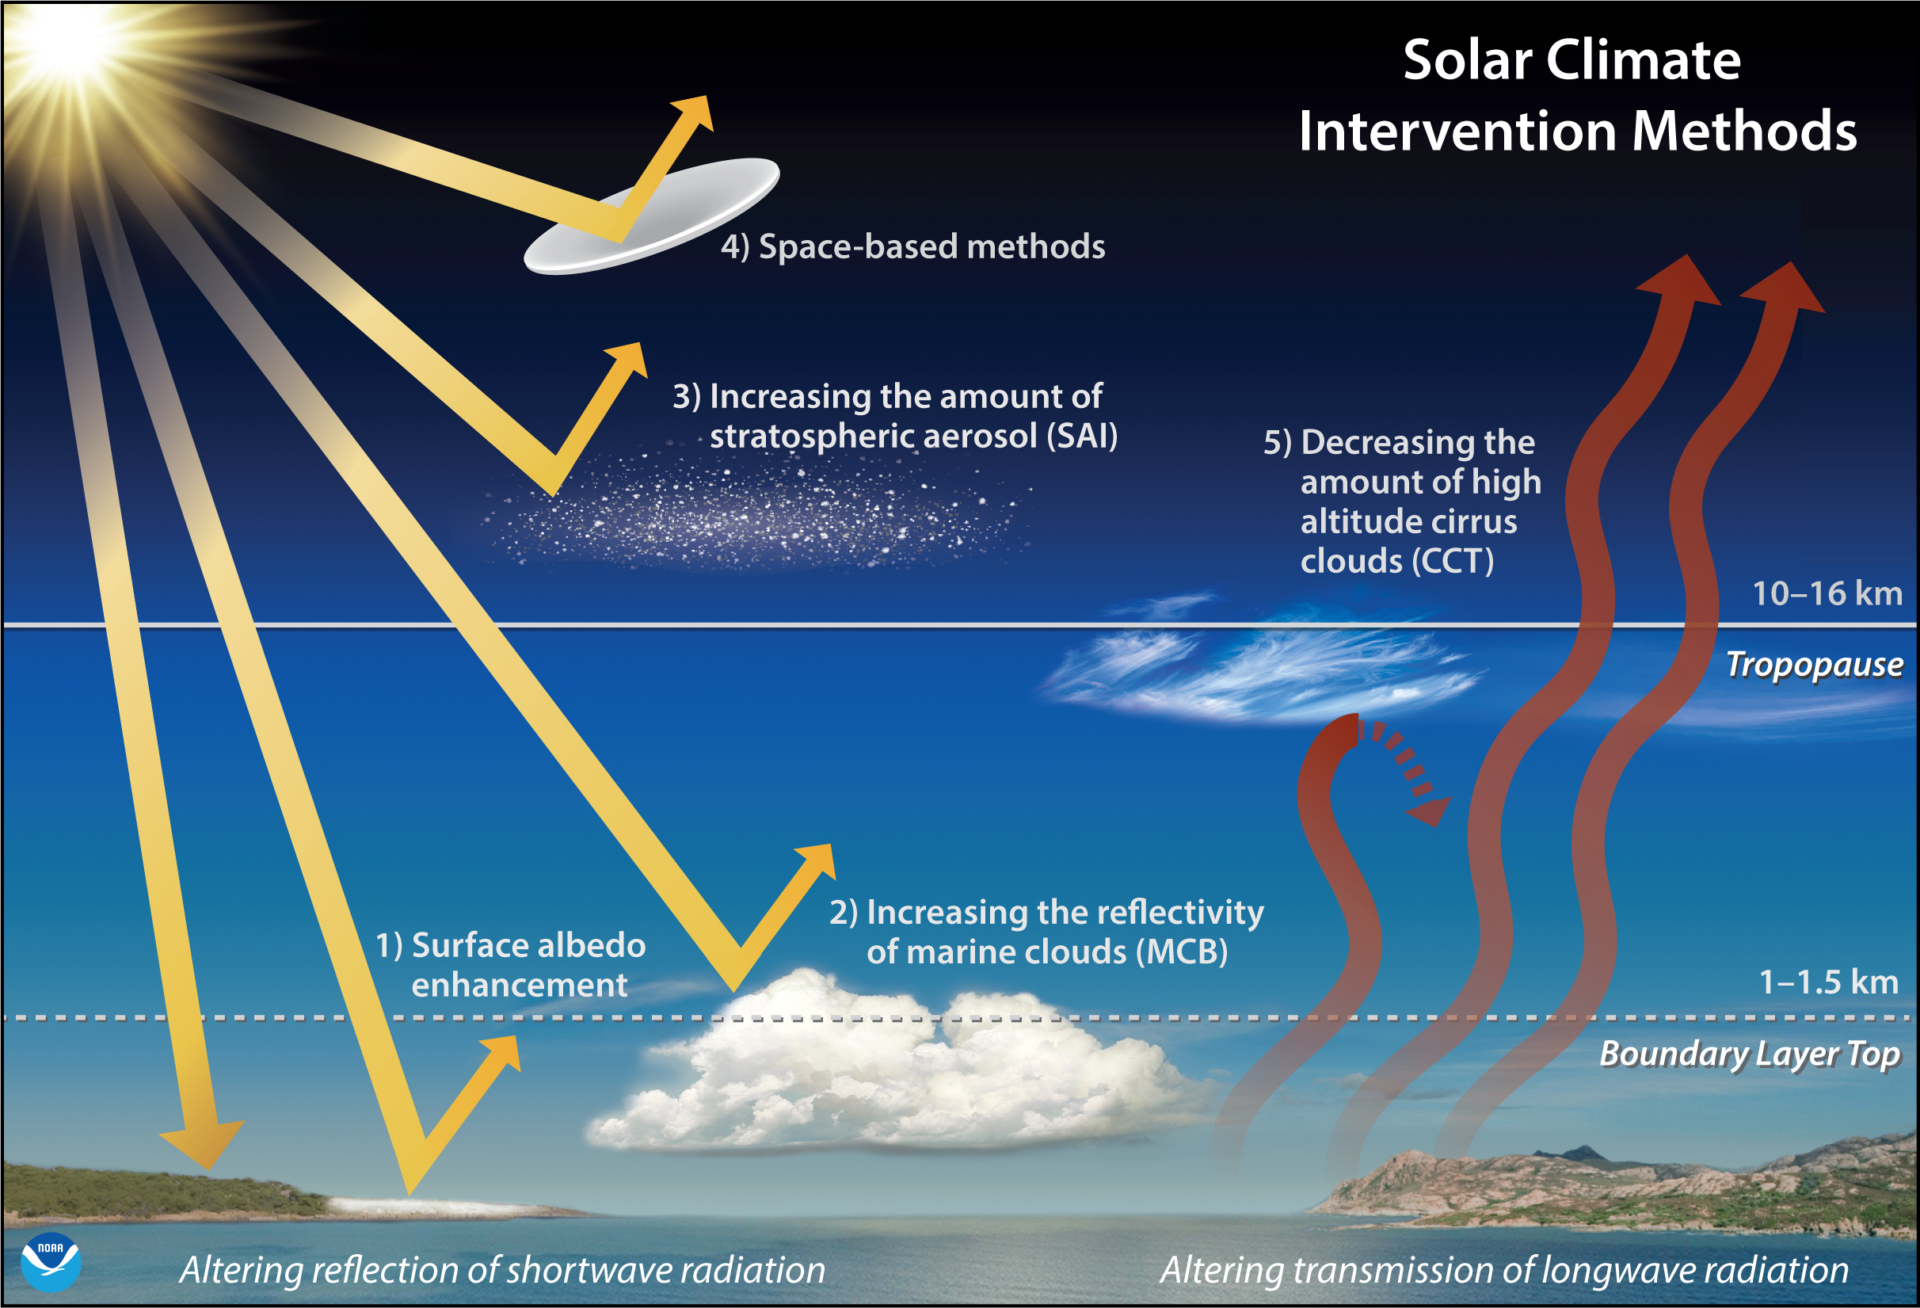 Proposed methods for climate intervention that would affect climate by modifying either incoming or outgoing solar radiation. (Chelsea Thompson, NOAA / CIRES)